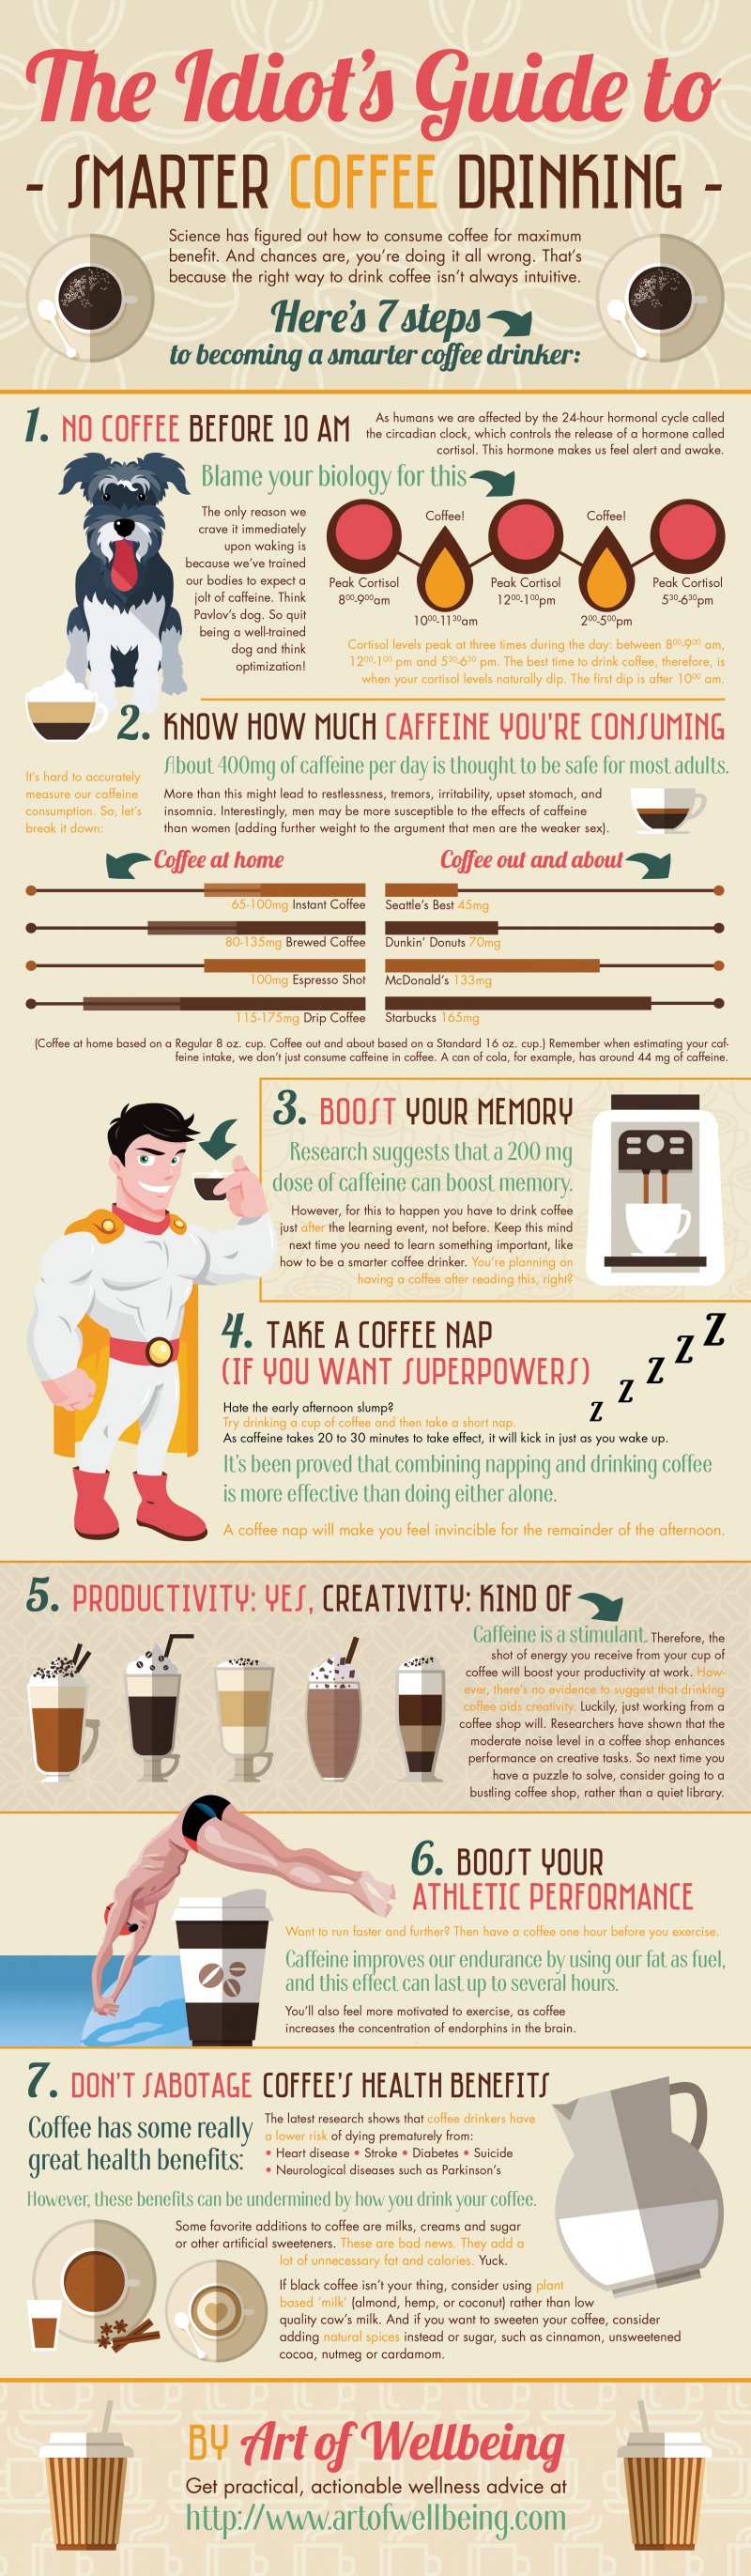 Idiot's Guide To Smarter Coffee Drinking